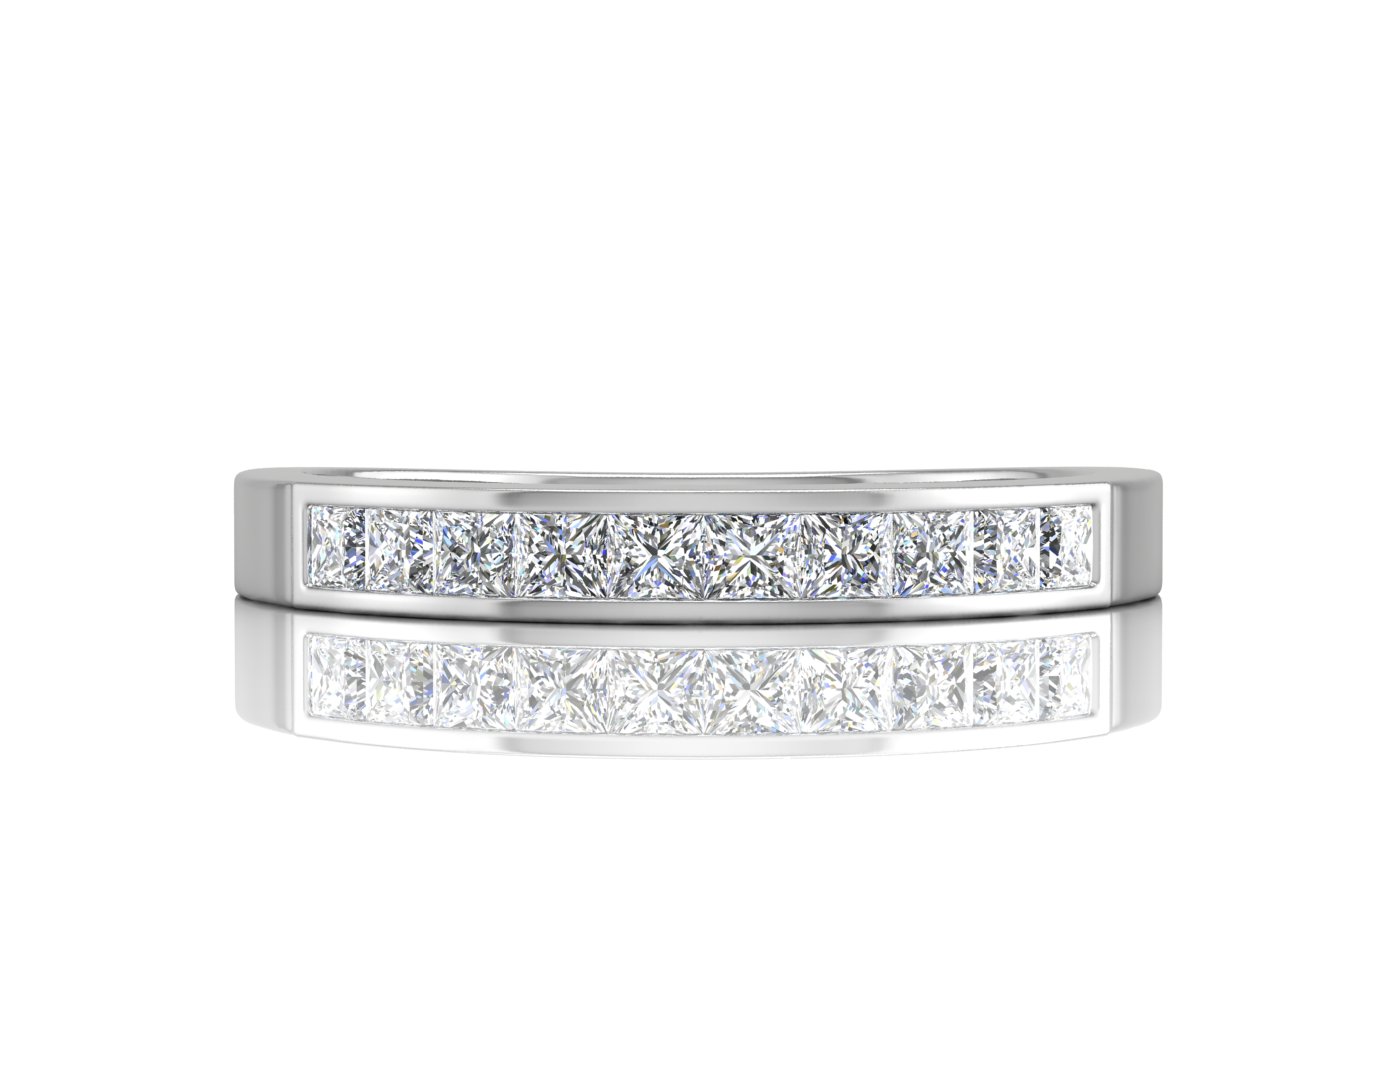 View Our Diamond Engagement Ring Collection